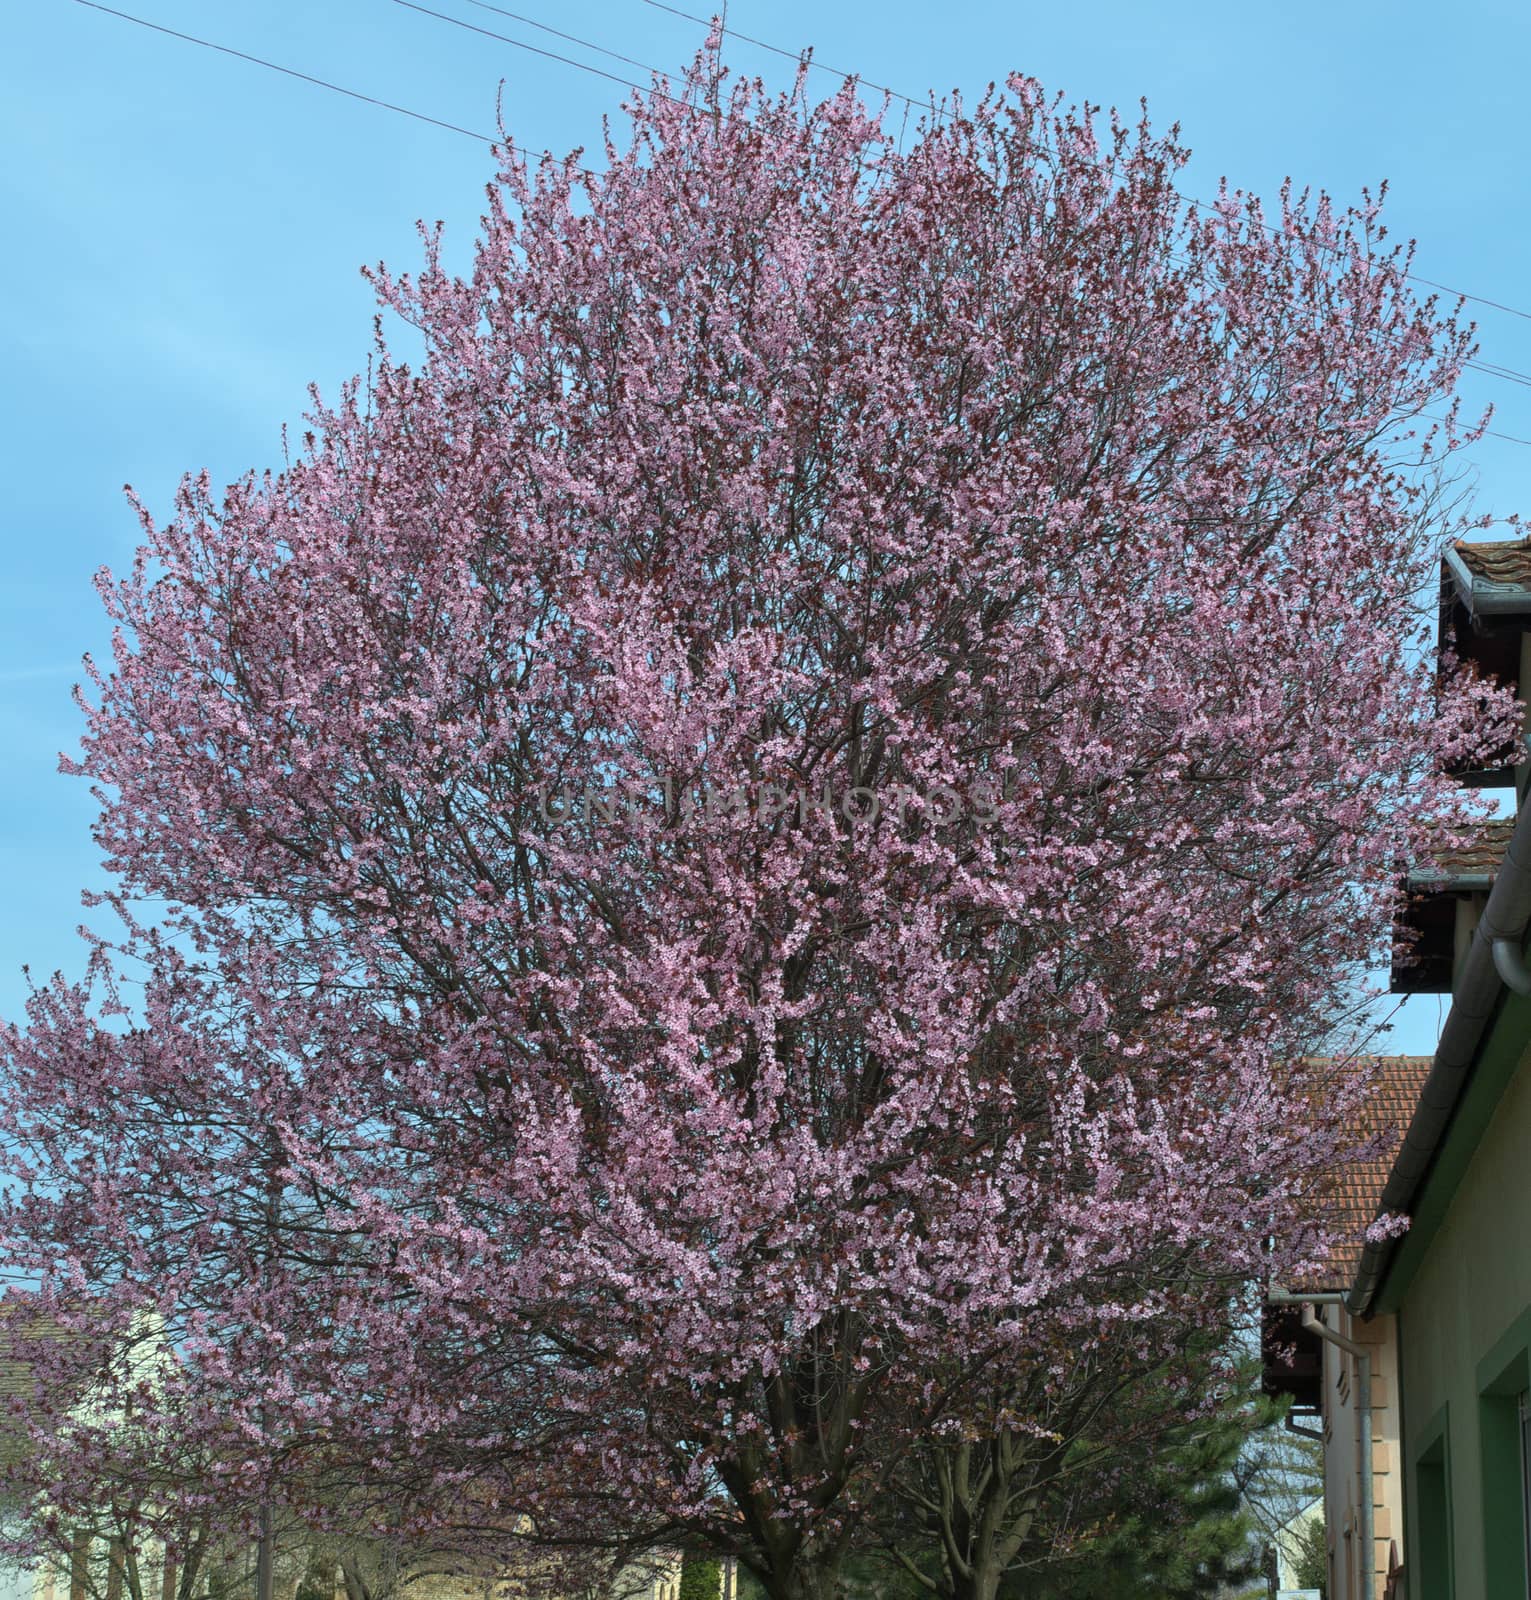 Tree blossoming with pink flowers, at spring time by sheriffkule